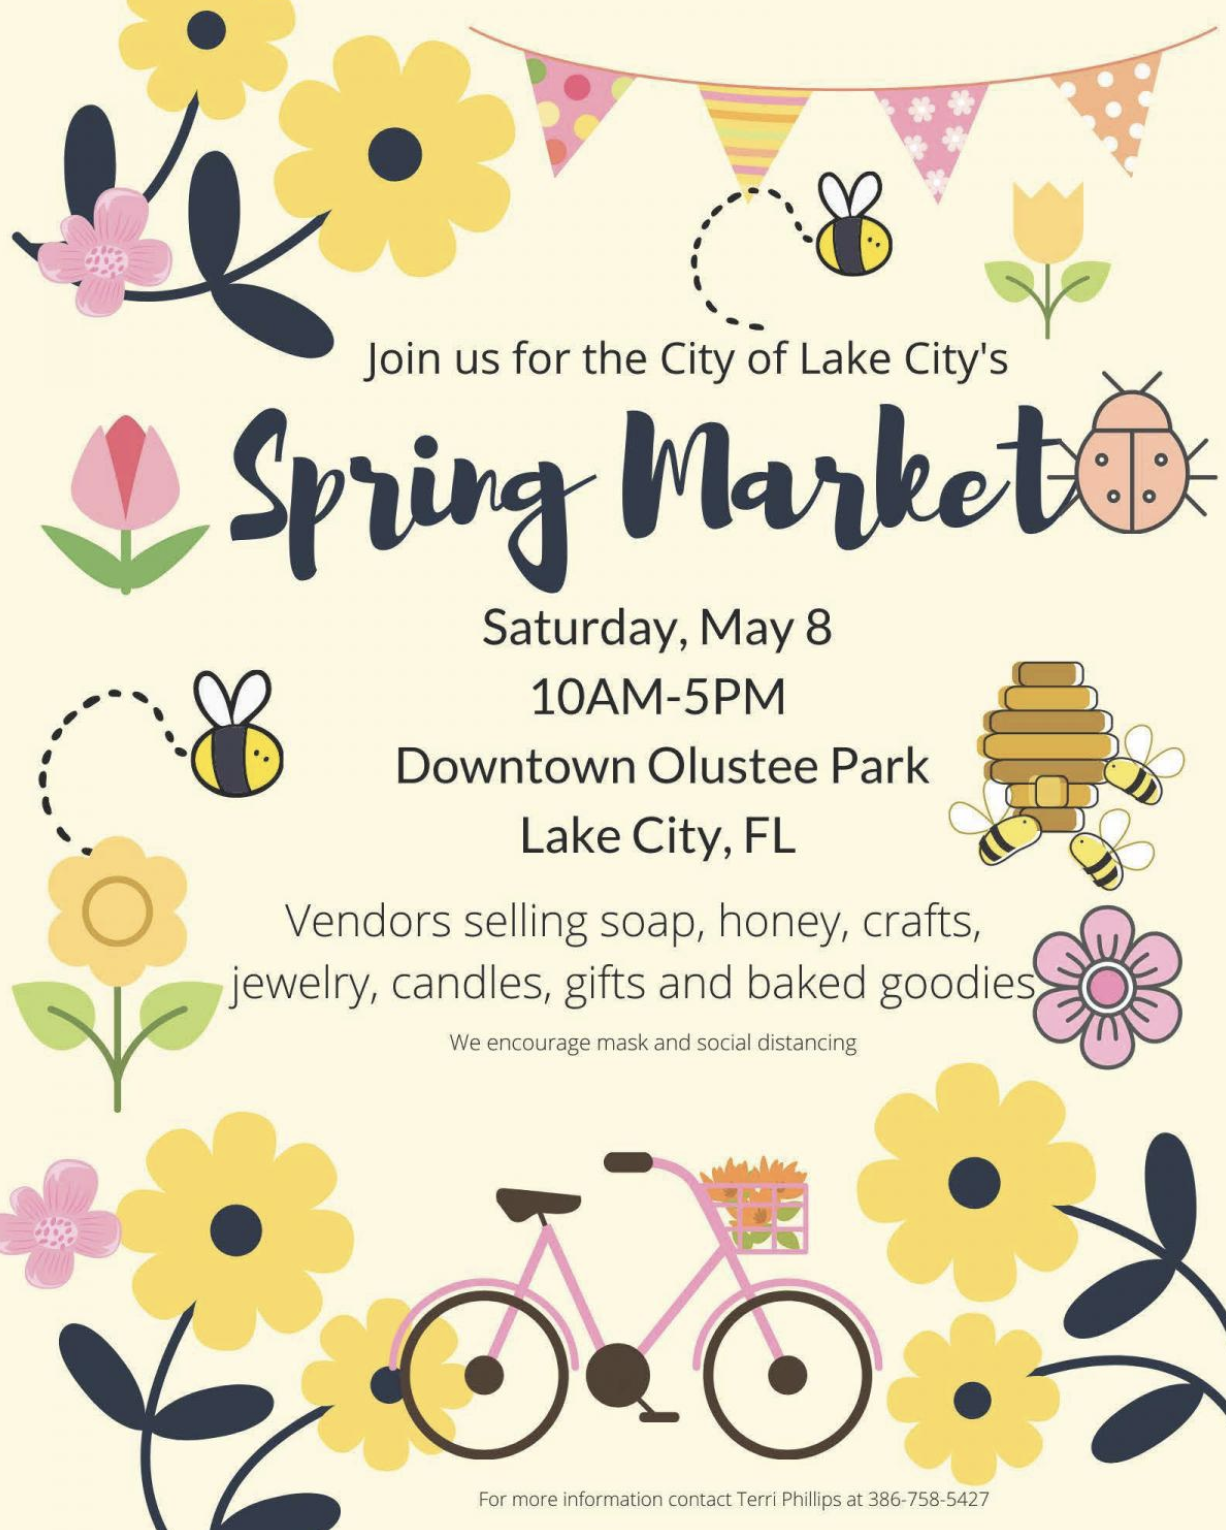 City of Lake City's Annual Spring Market